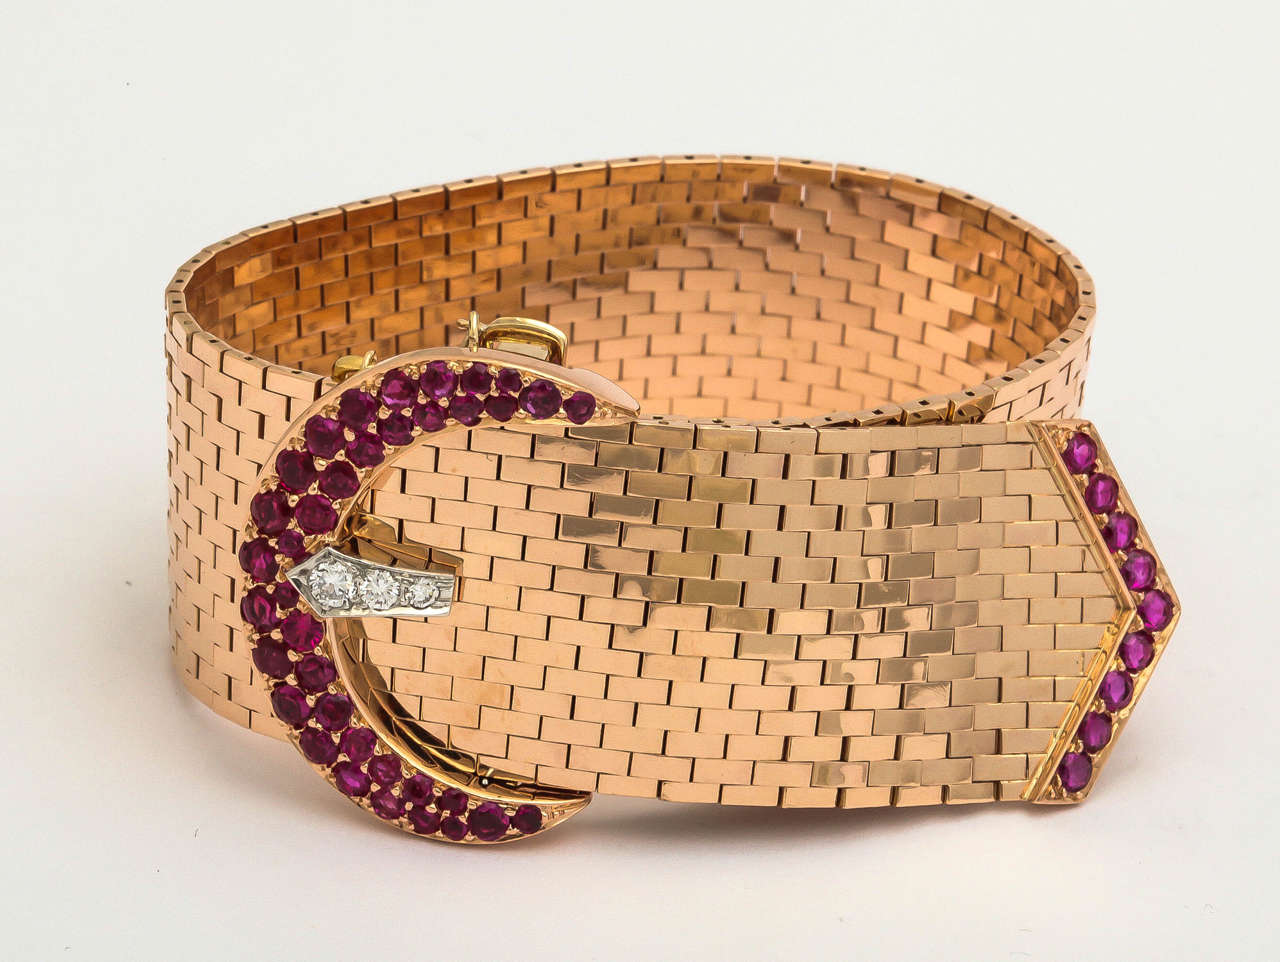 14 KT Rose Gold Brick Mesh Belt Buckle Bracelet Designed in a Highly Flexible Mesh Design Embellished with Numerous Faceted Round Cut Rubies Weighing Approximately 3 Carats & 3 High Quality Full Cut Diamonds Weighing Approximately .50